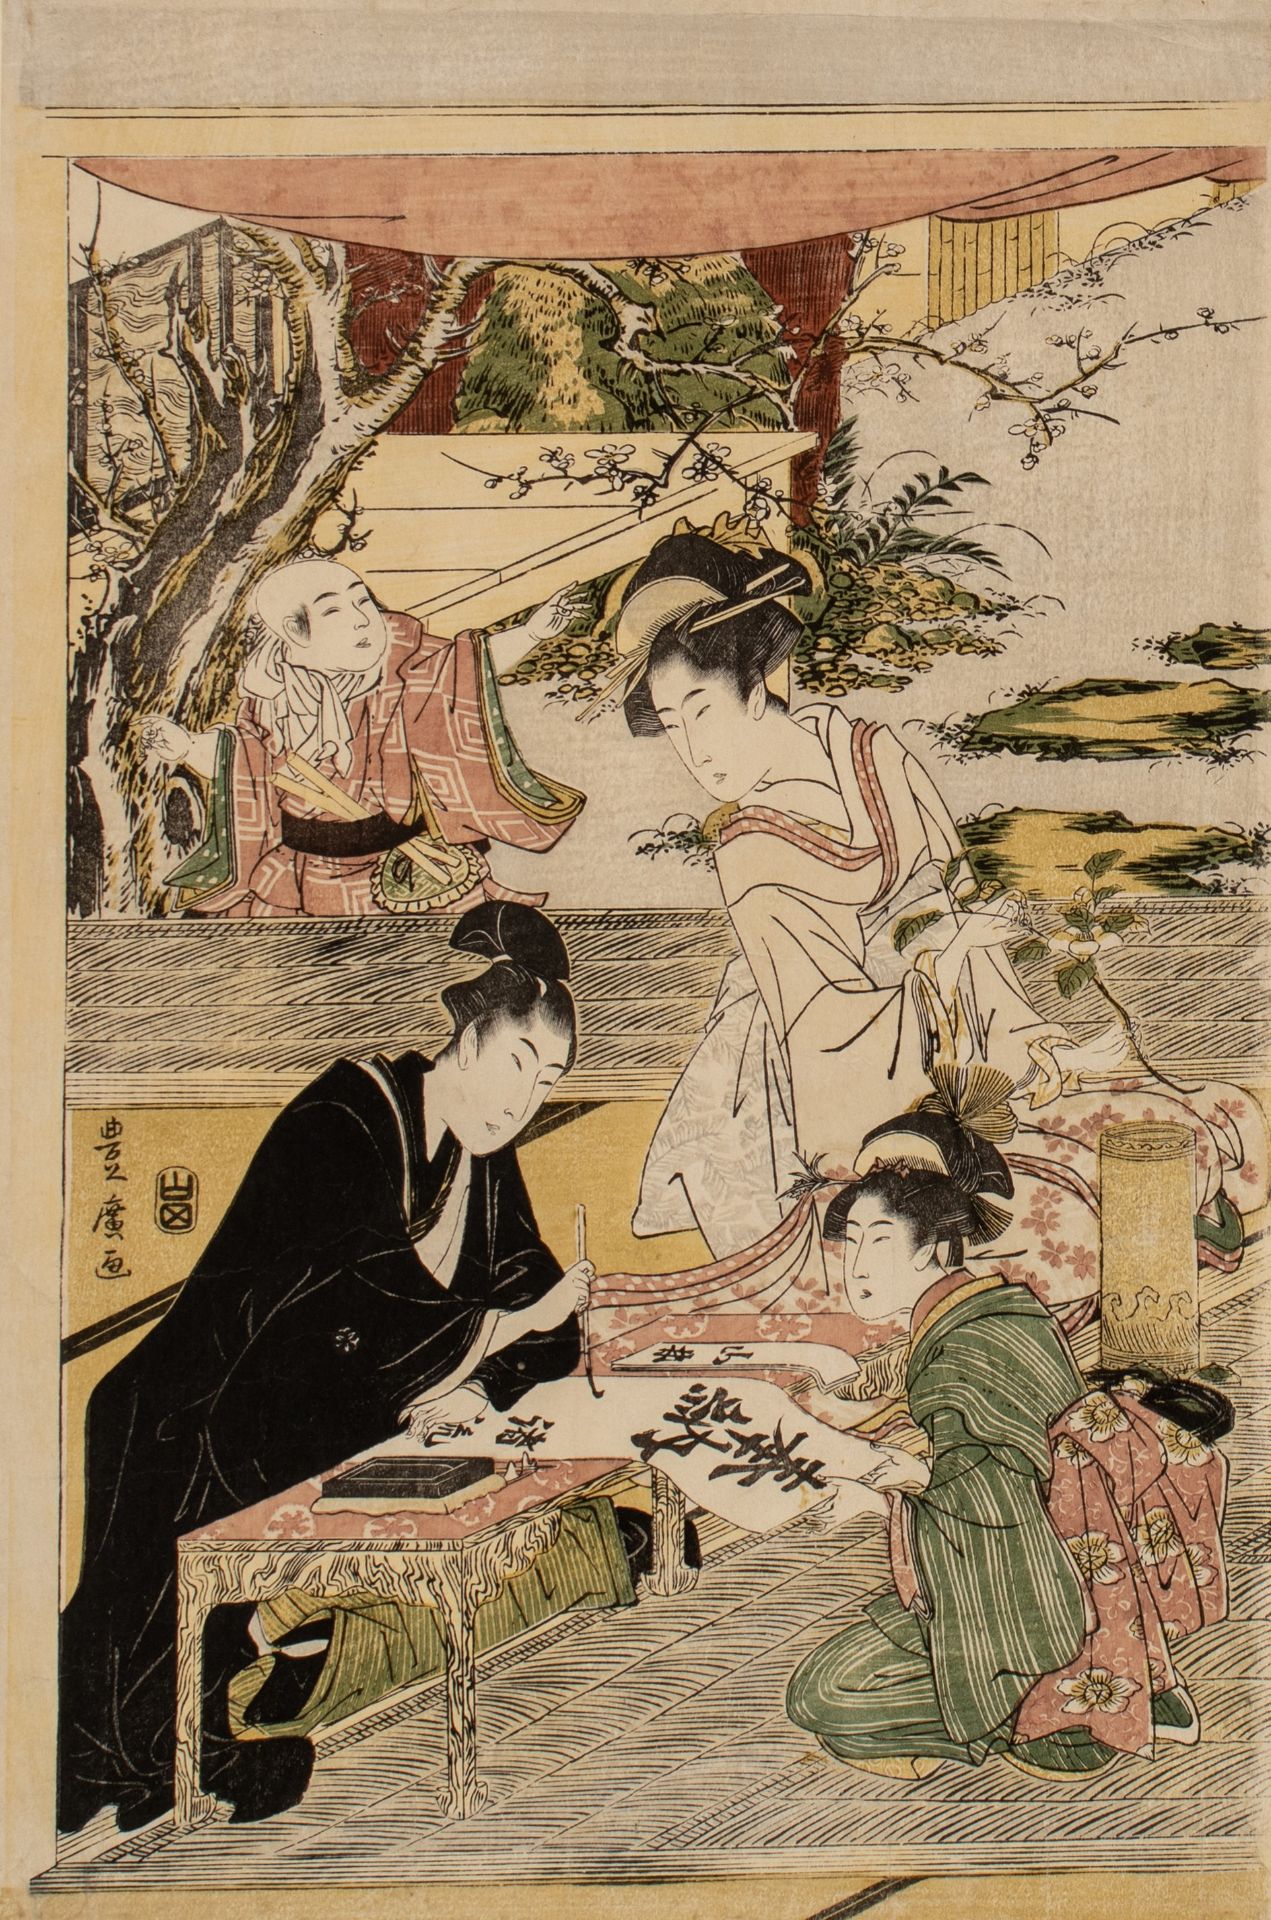 A Japanese woodblock print by Toyohiro, geishas with a young nobleman practising calligraphy, ca. 17